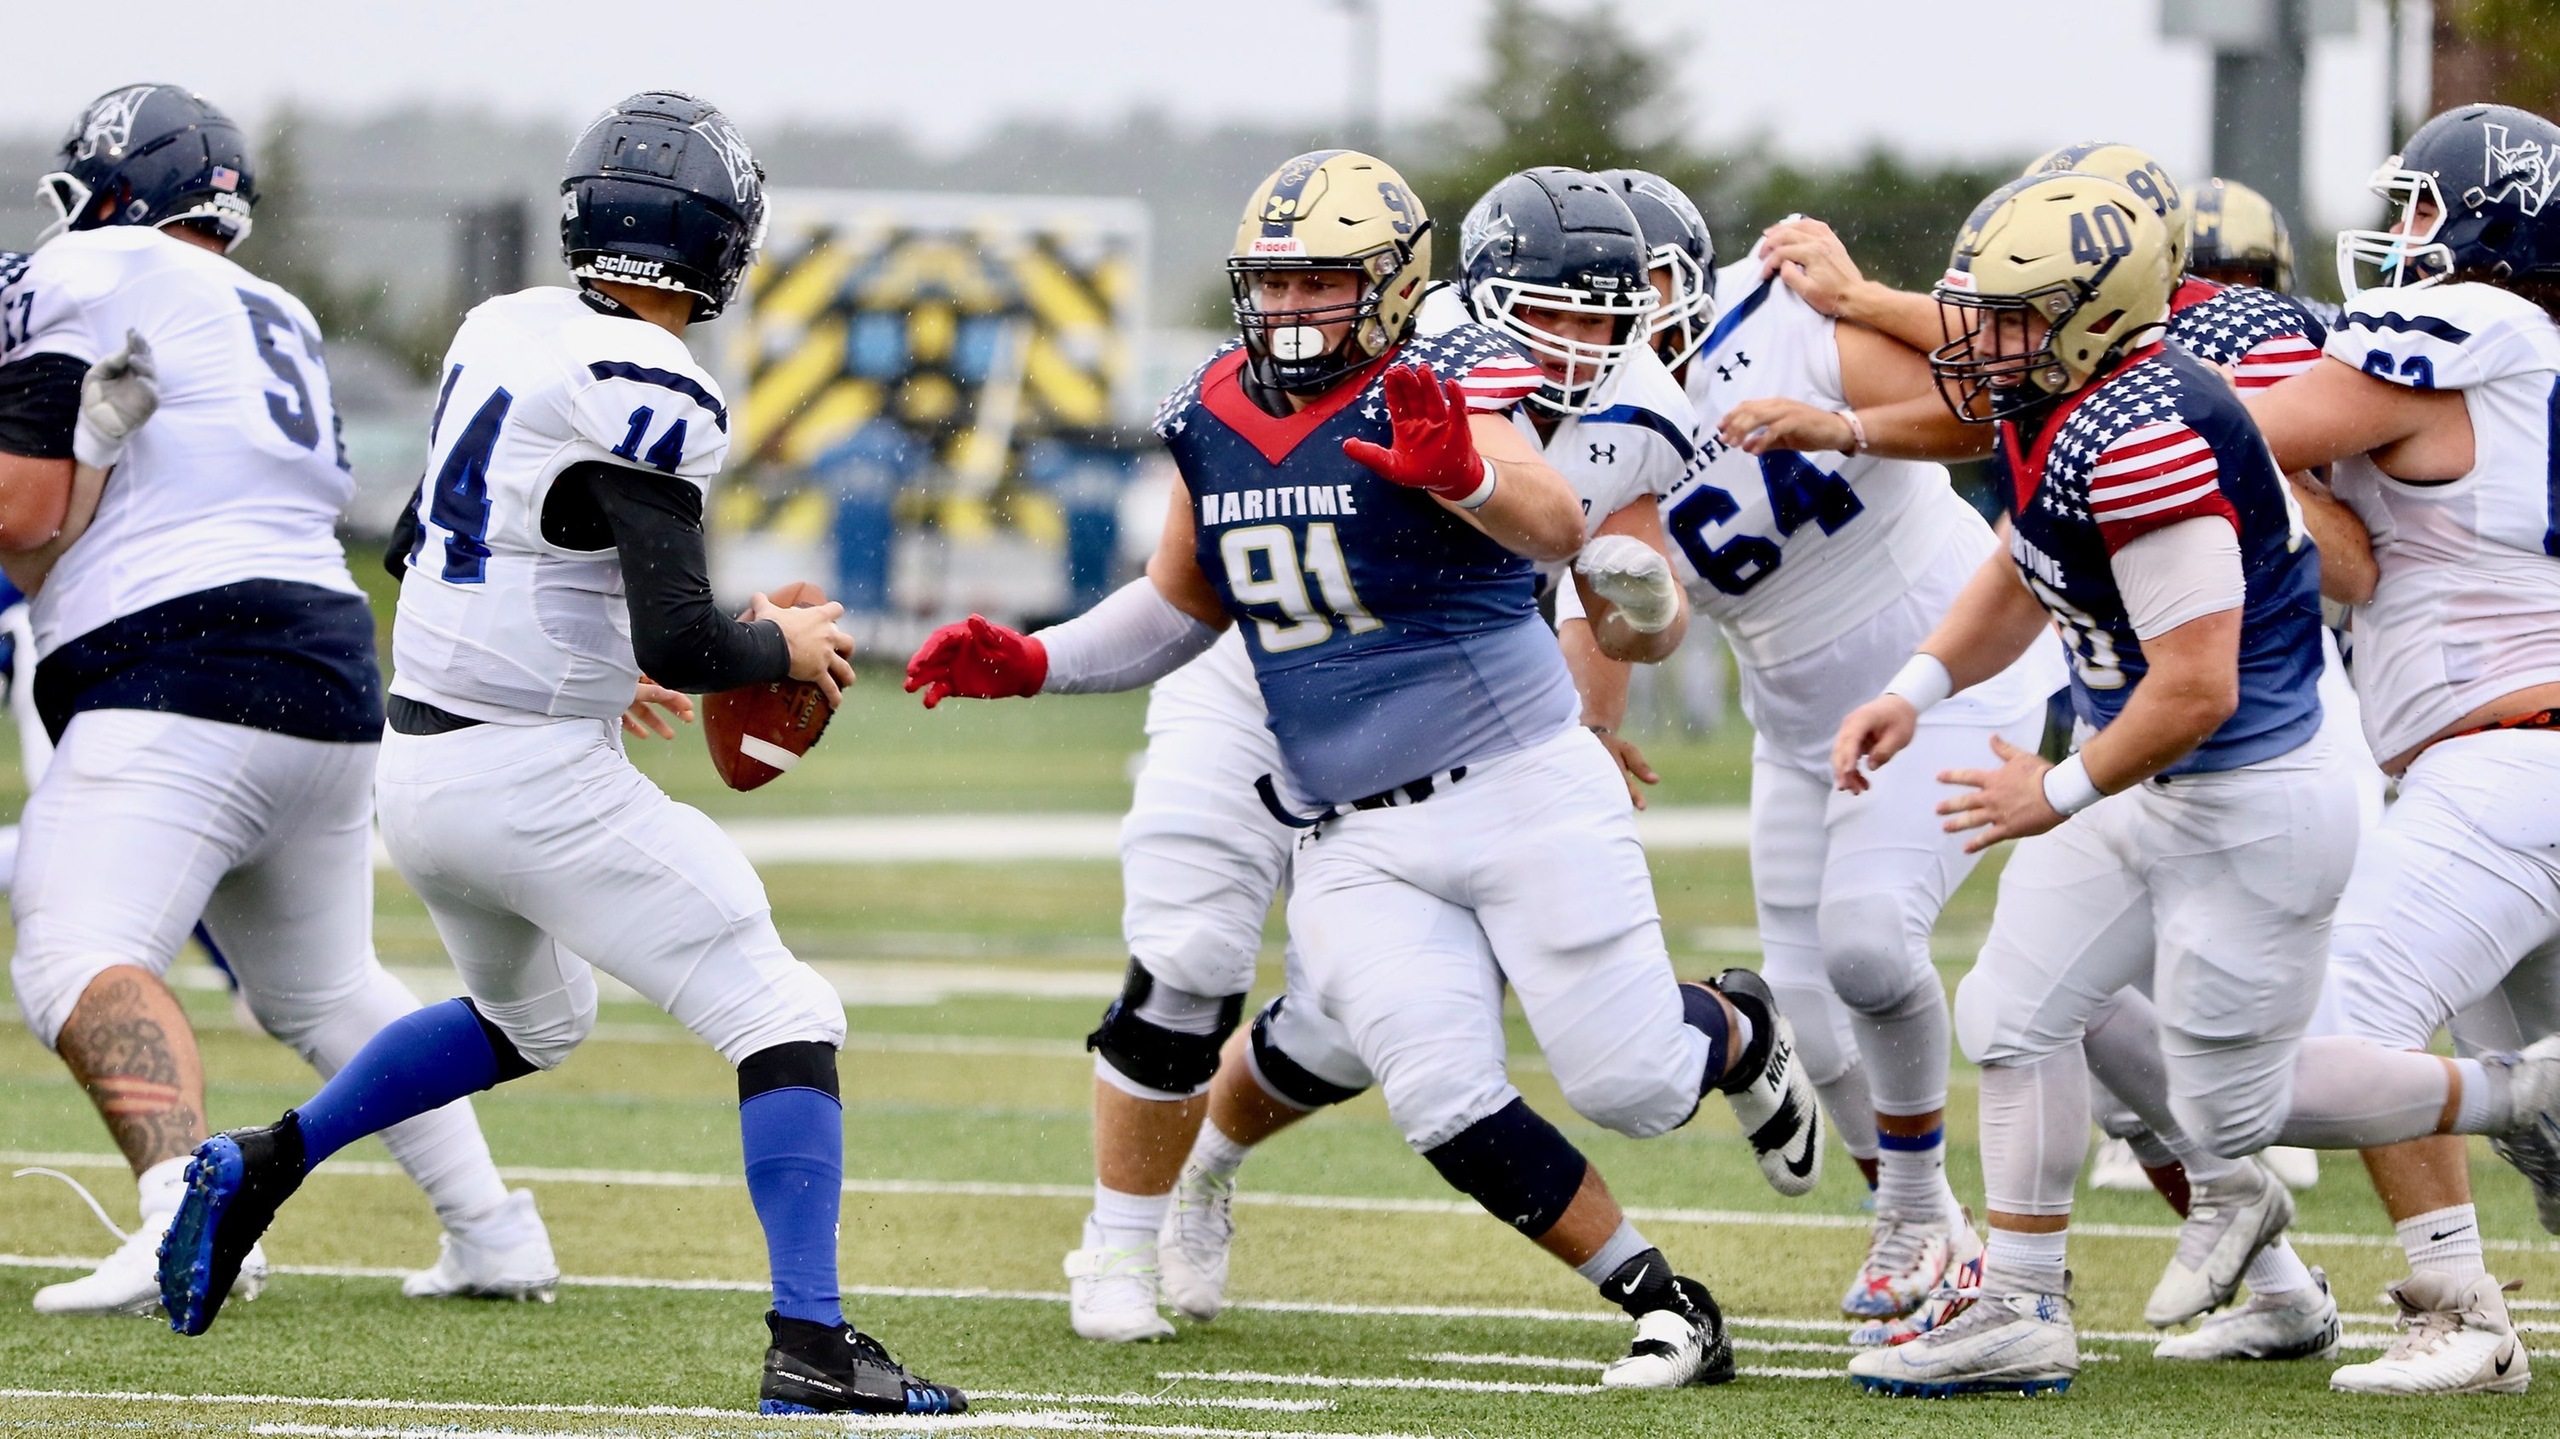 Football: Bucs Clip Owls to Stay Undefeated in Conference